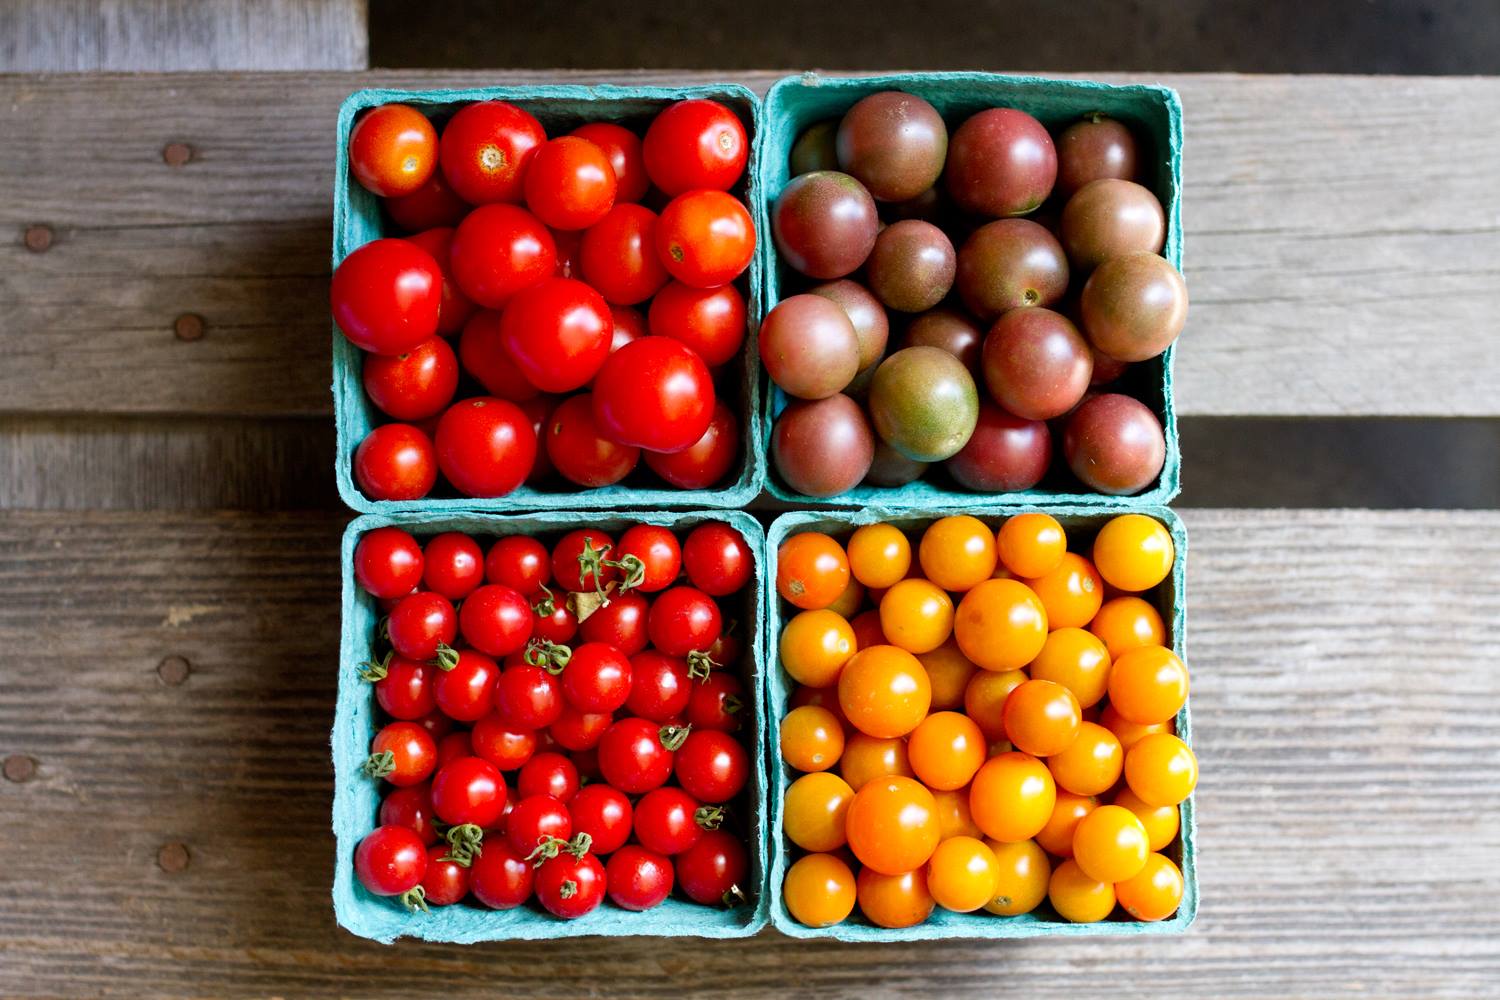 Picture of 4 quarts of tomatoes, each a different size and color.